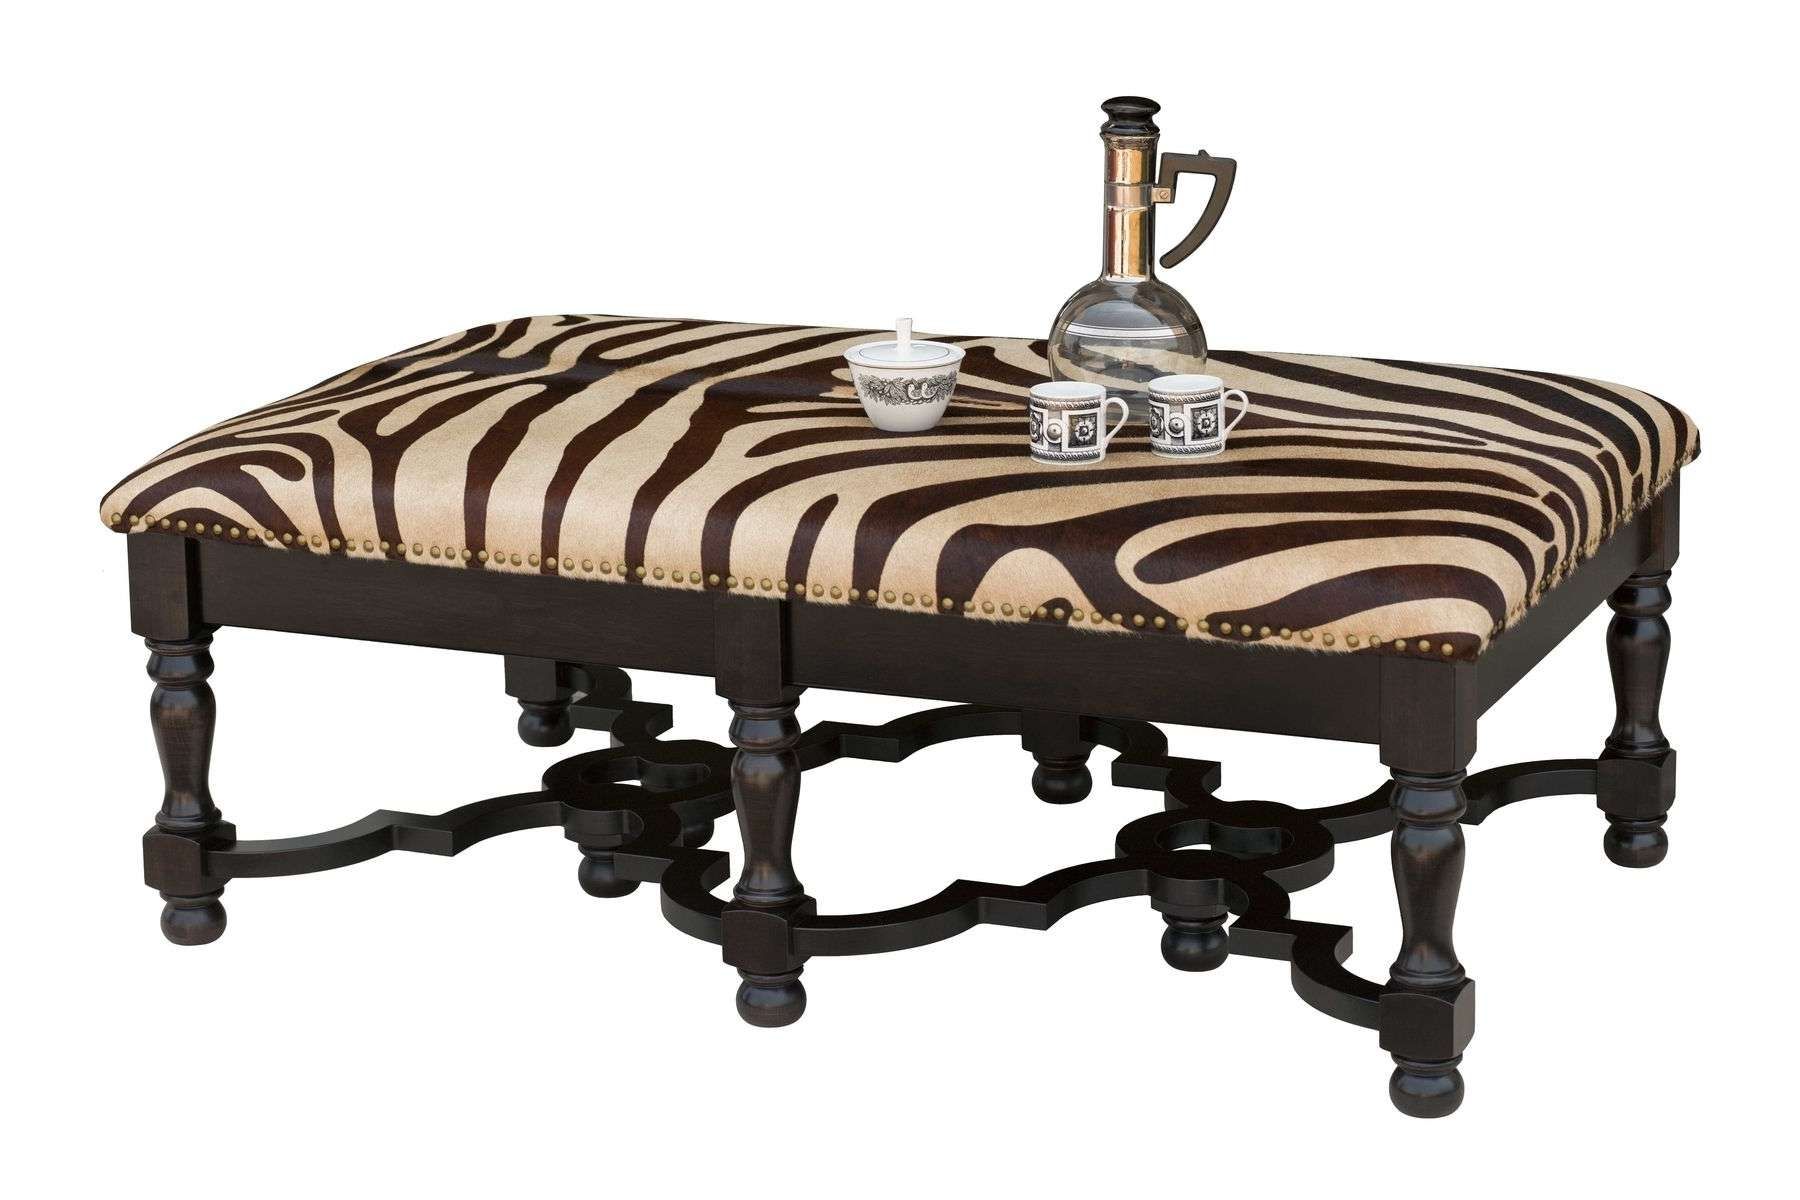 Hand Crafted Zebra Hide Ottoman Coffee Tablecorl Design Ltd For Fashionable Leopard Ottoman Coffee Tables (Gallery 6 of 20)